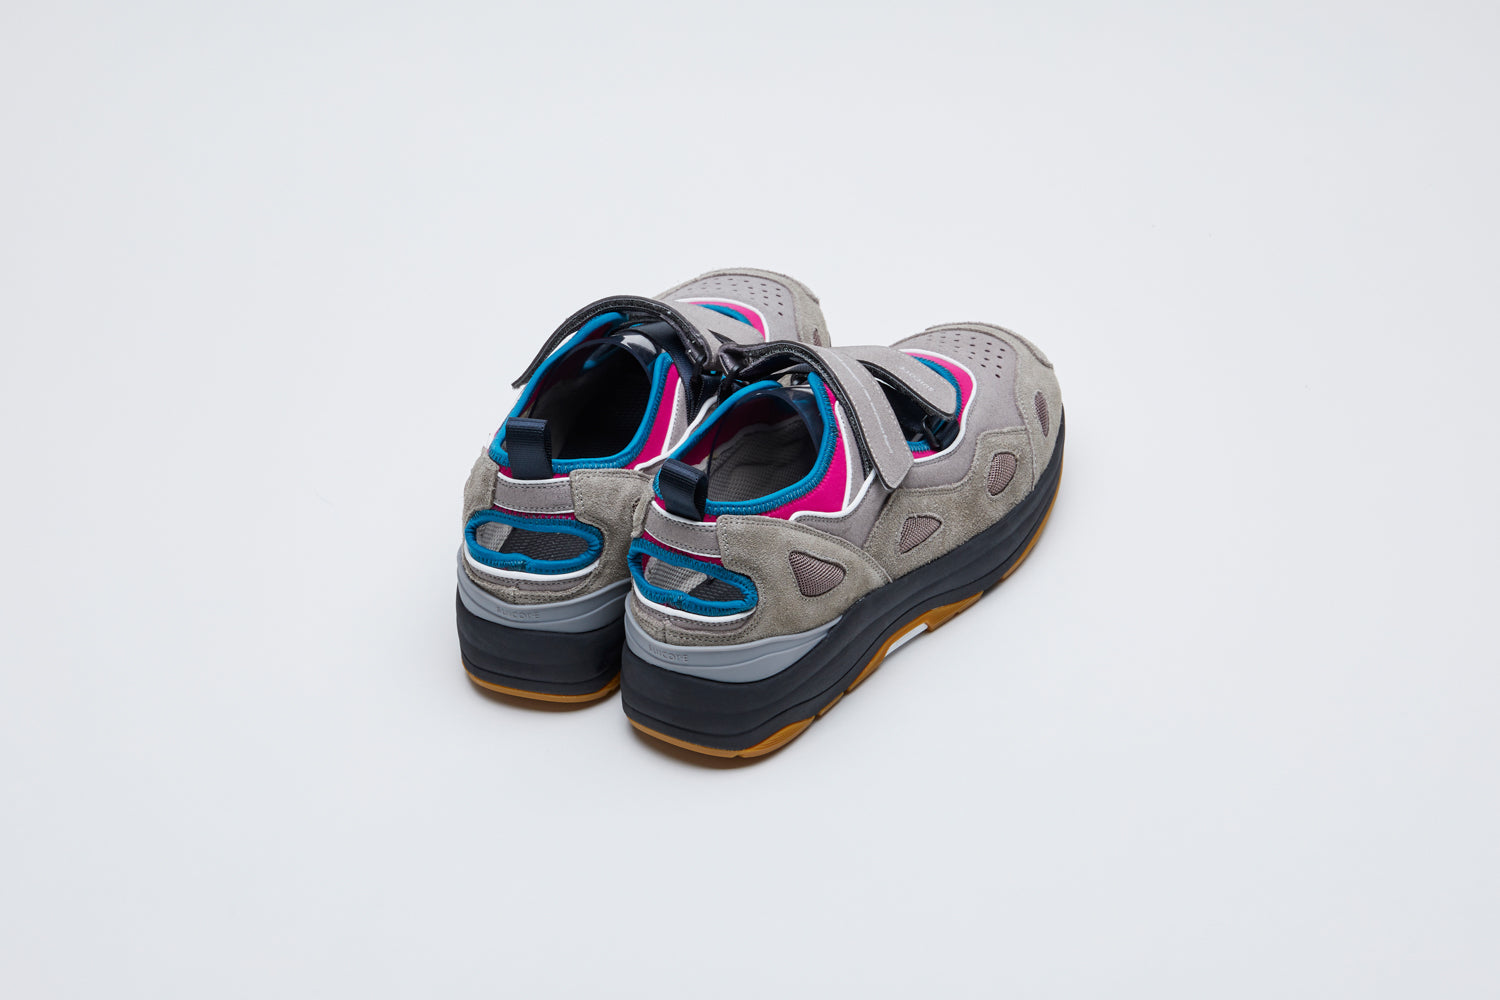 SUICOKE AKK-ab shoe with magenta polyester, navy nylon and gray suede, black rubber running midsole and beige sole. Upper finished with blue piping, gray velcro straps with heel loop. Small openings at heel and top where straps are placed. From Fall/Winter 2021 collection on SUICOKE Official US & Canada Webstore.